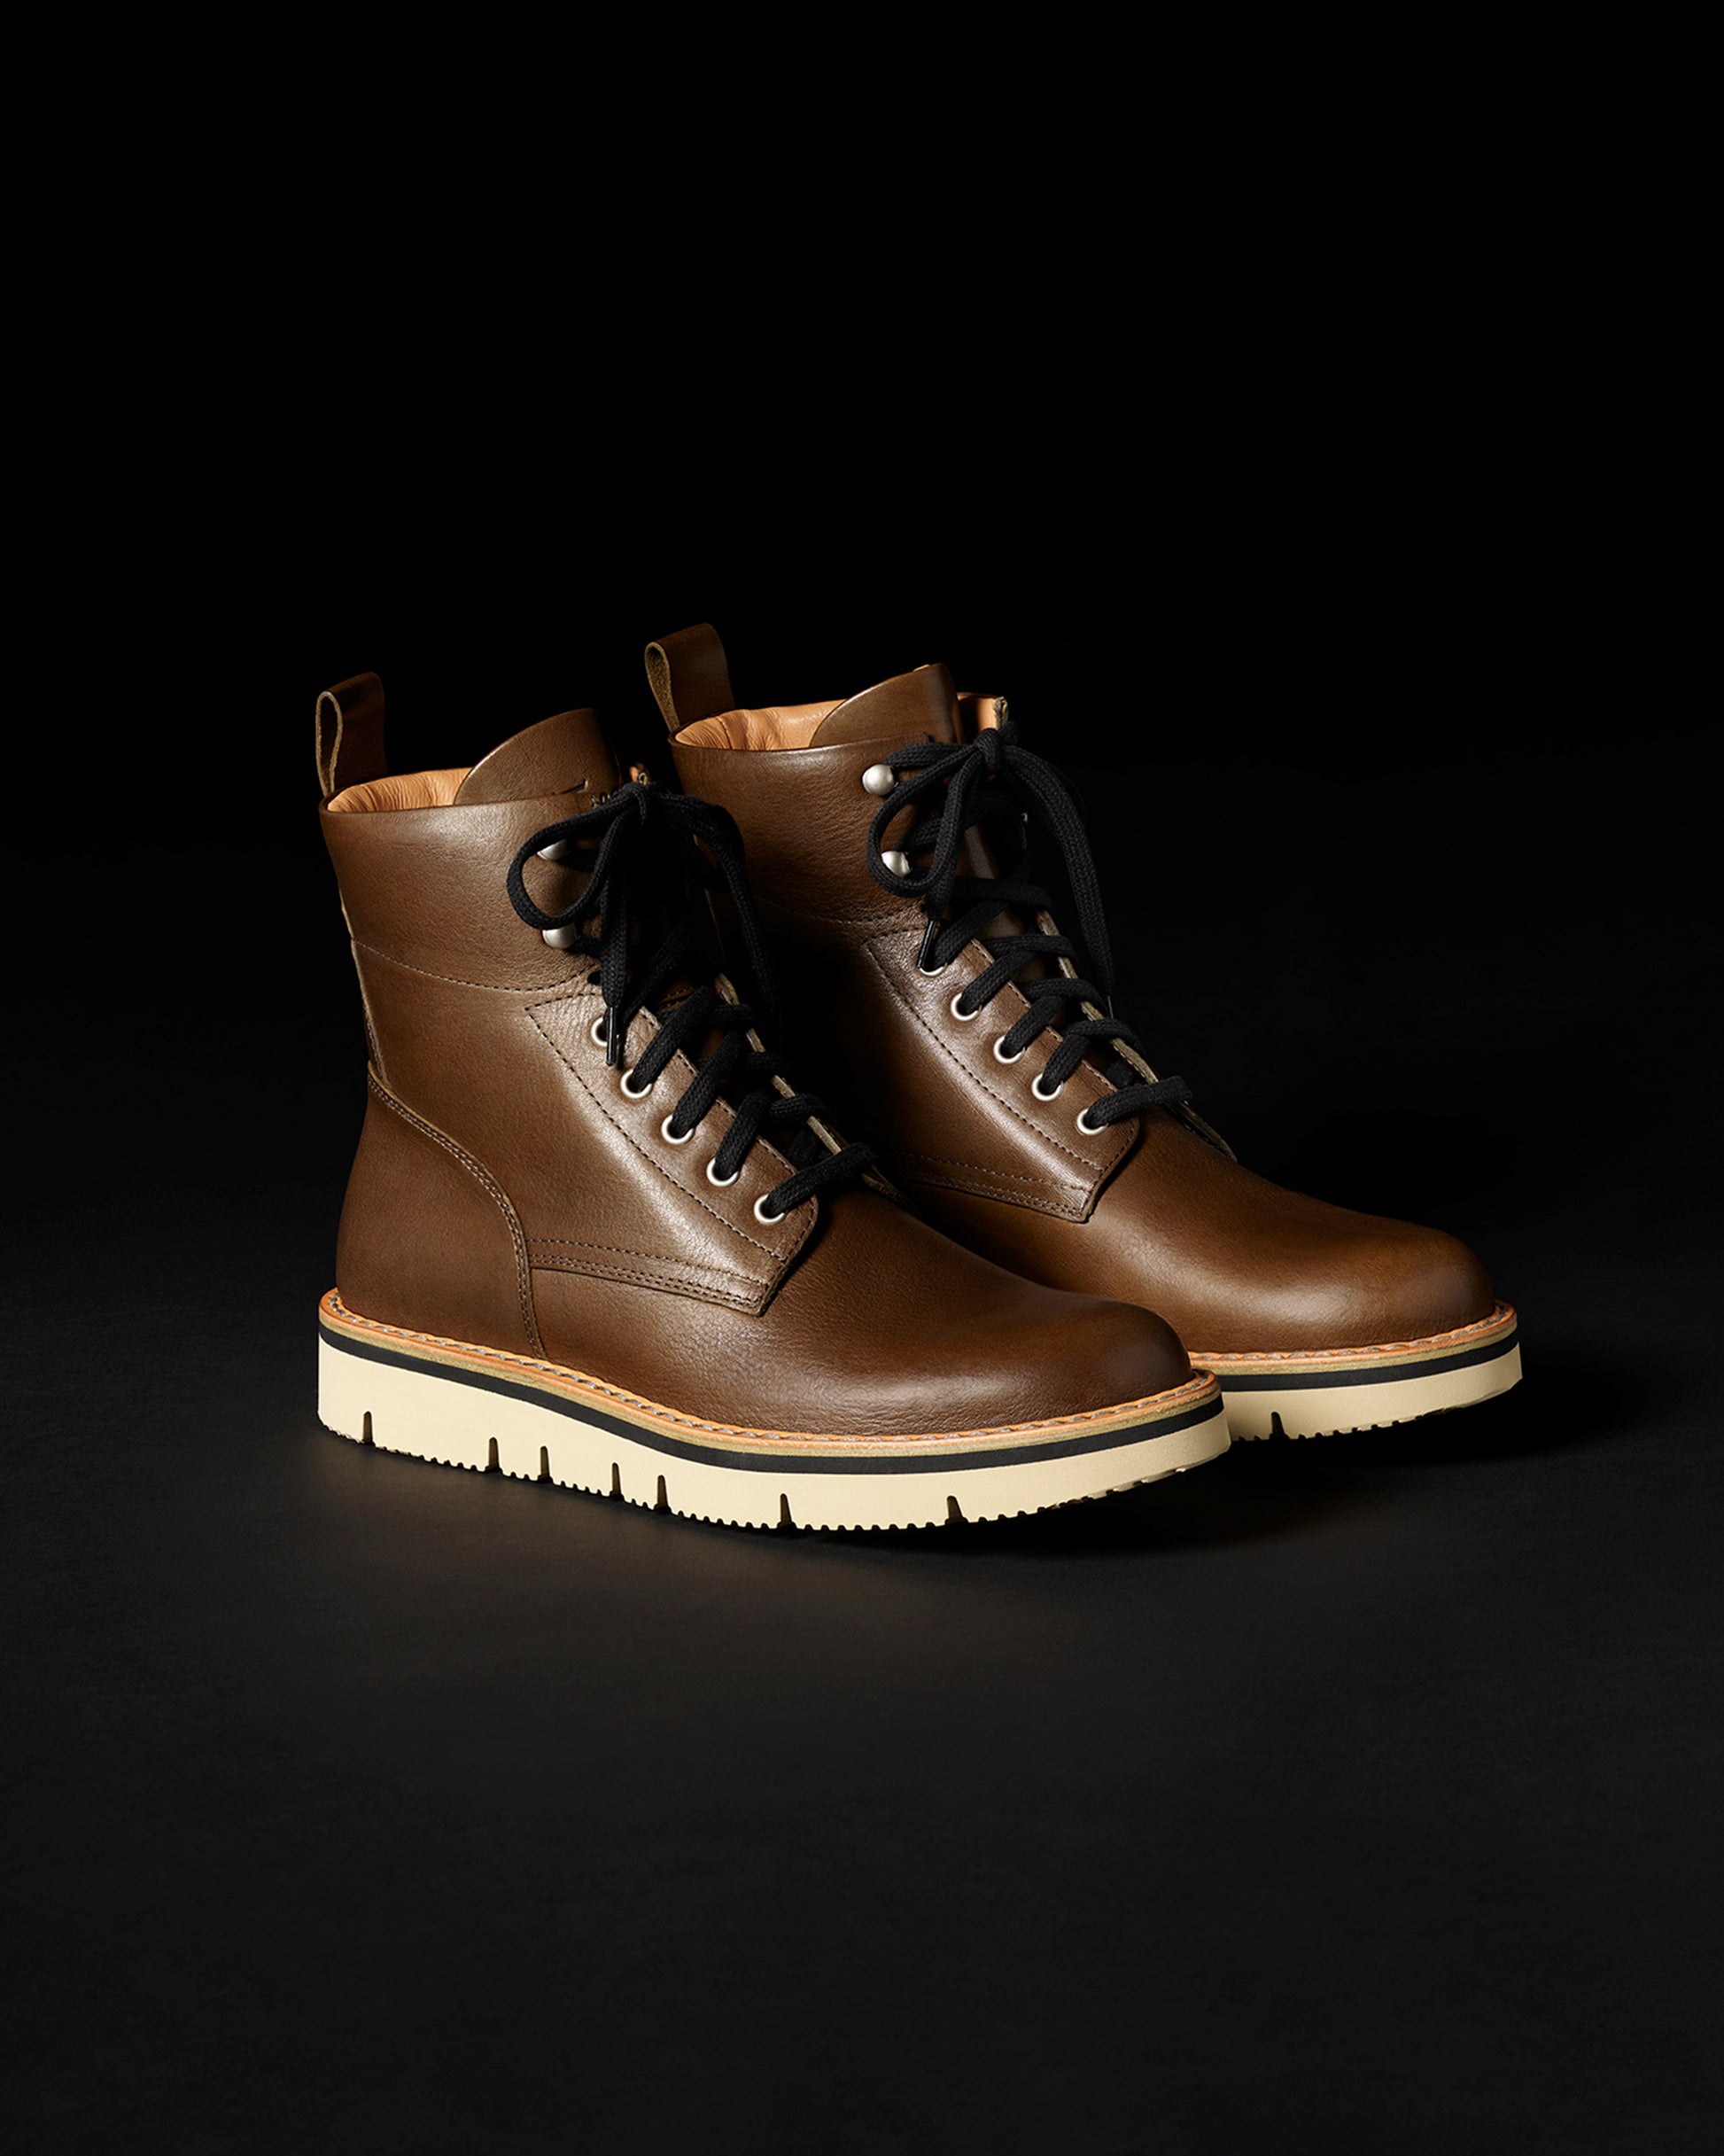 brown leather men's boots from AETHER Apparel